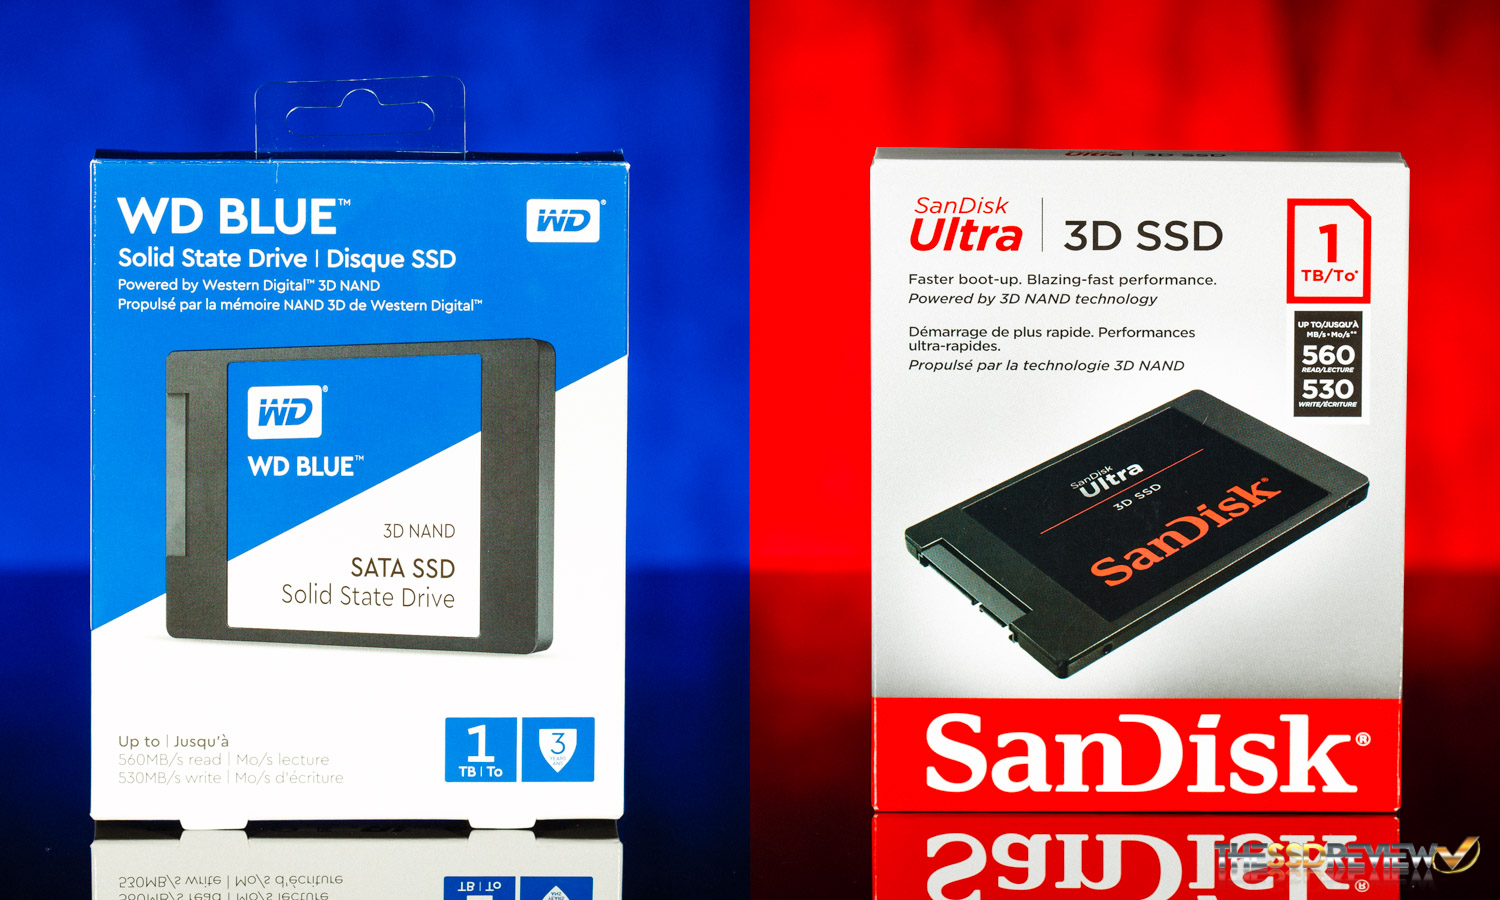 WD Blue 3D SSD & SanDisk Ultra 3D SSD Review (1TB) - Twins That 